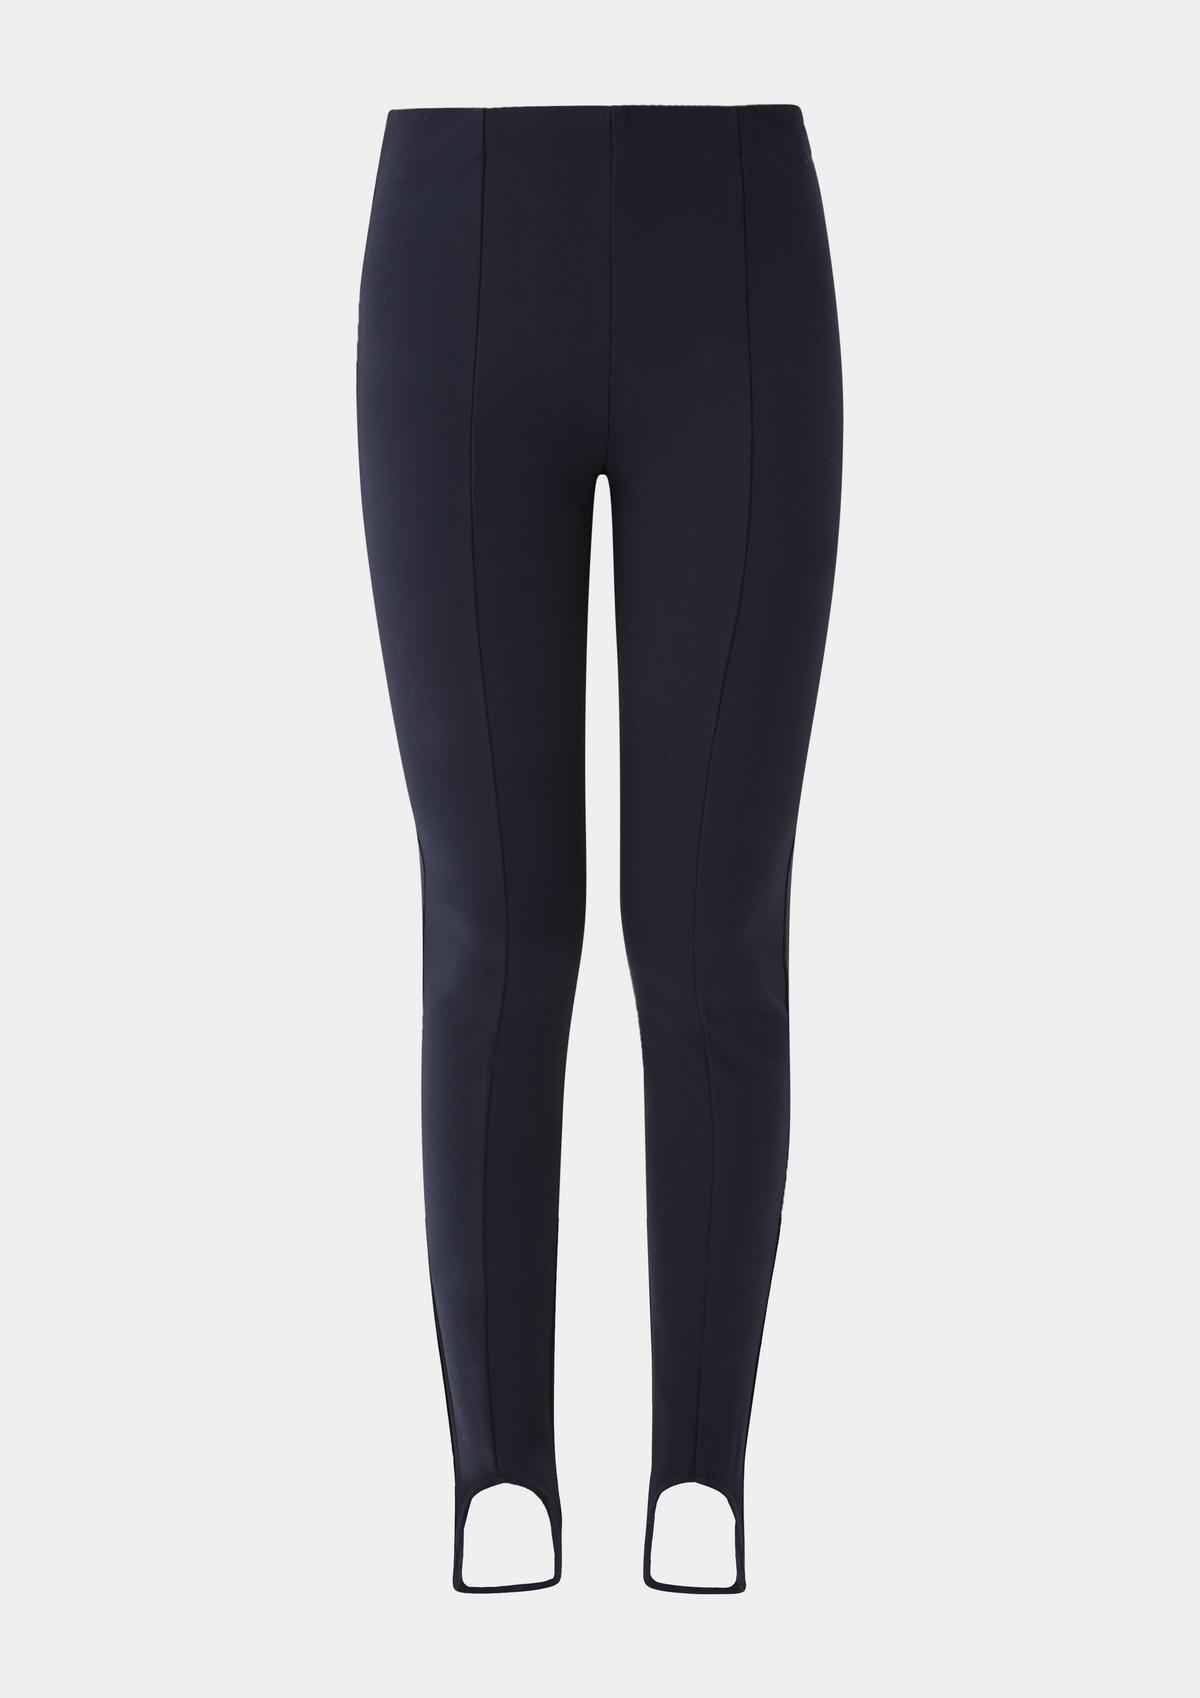 with foot - navy straps leggings fit: Skinny